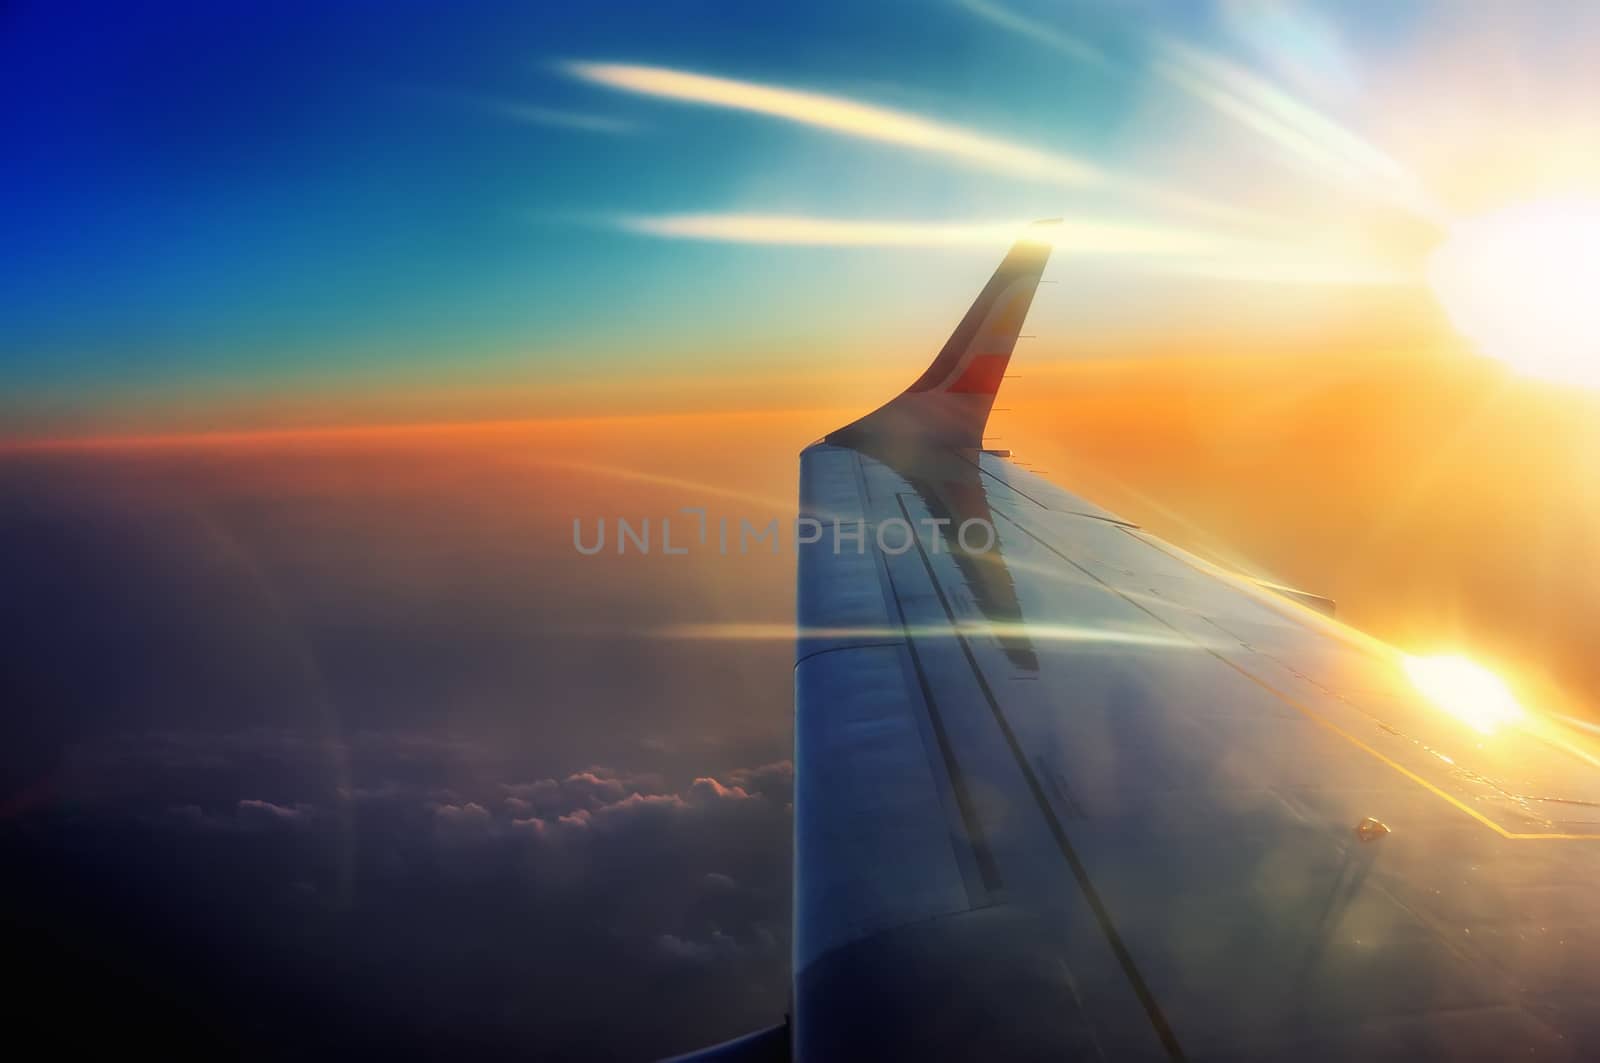 wing of the airplane in flight in sunrise beams by makspogonii